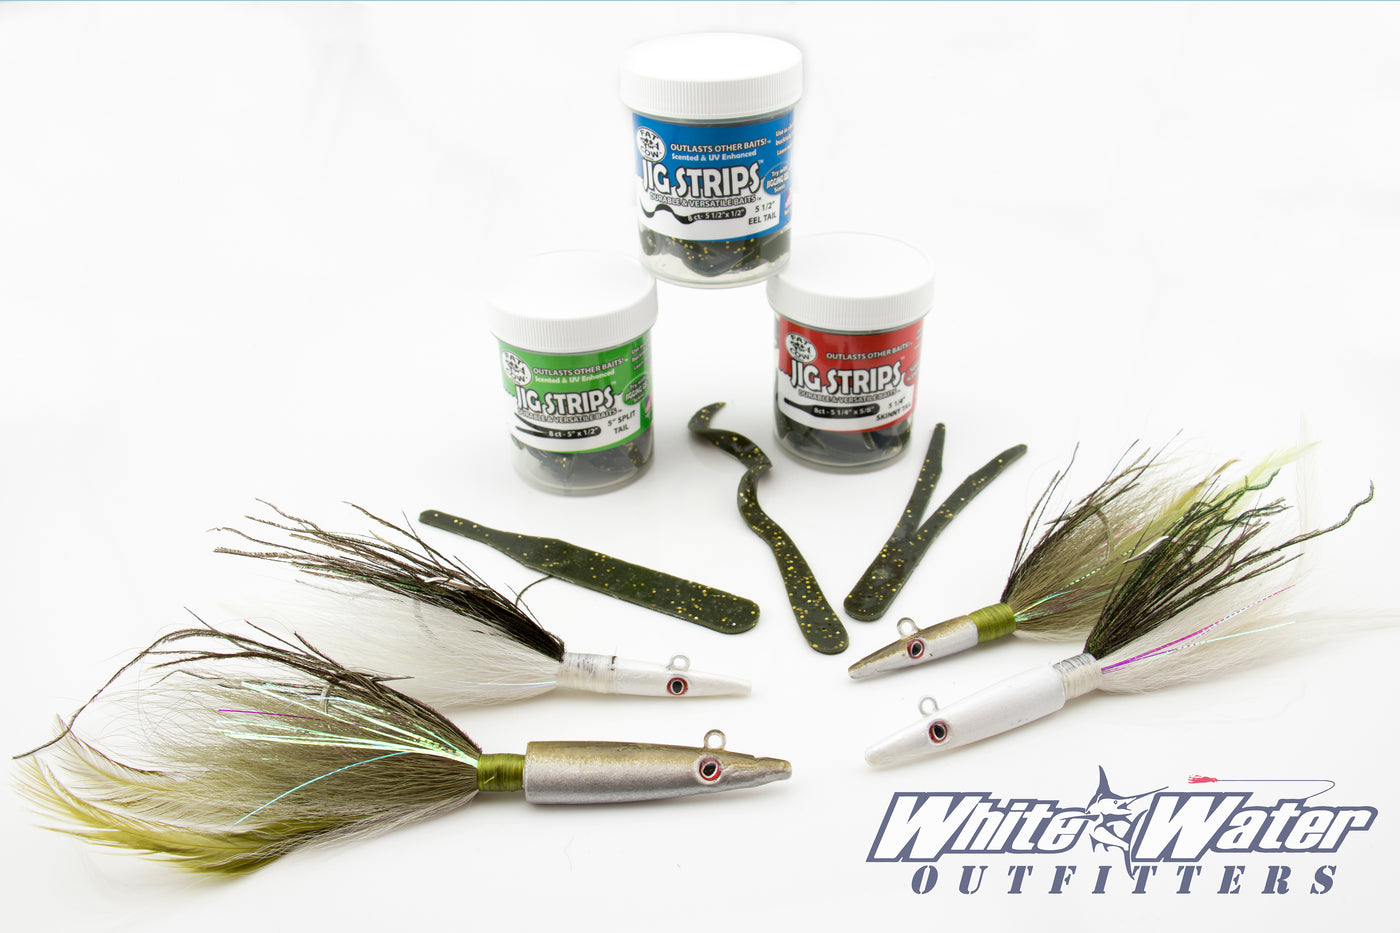 Lovertail 2 Snagless weedless bucktail tips - WELCOME TO JAMES